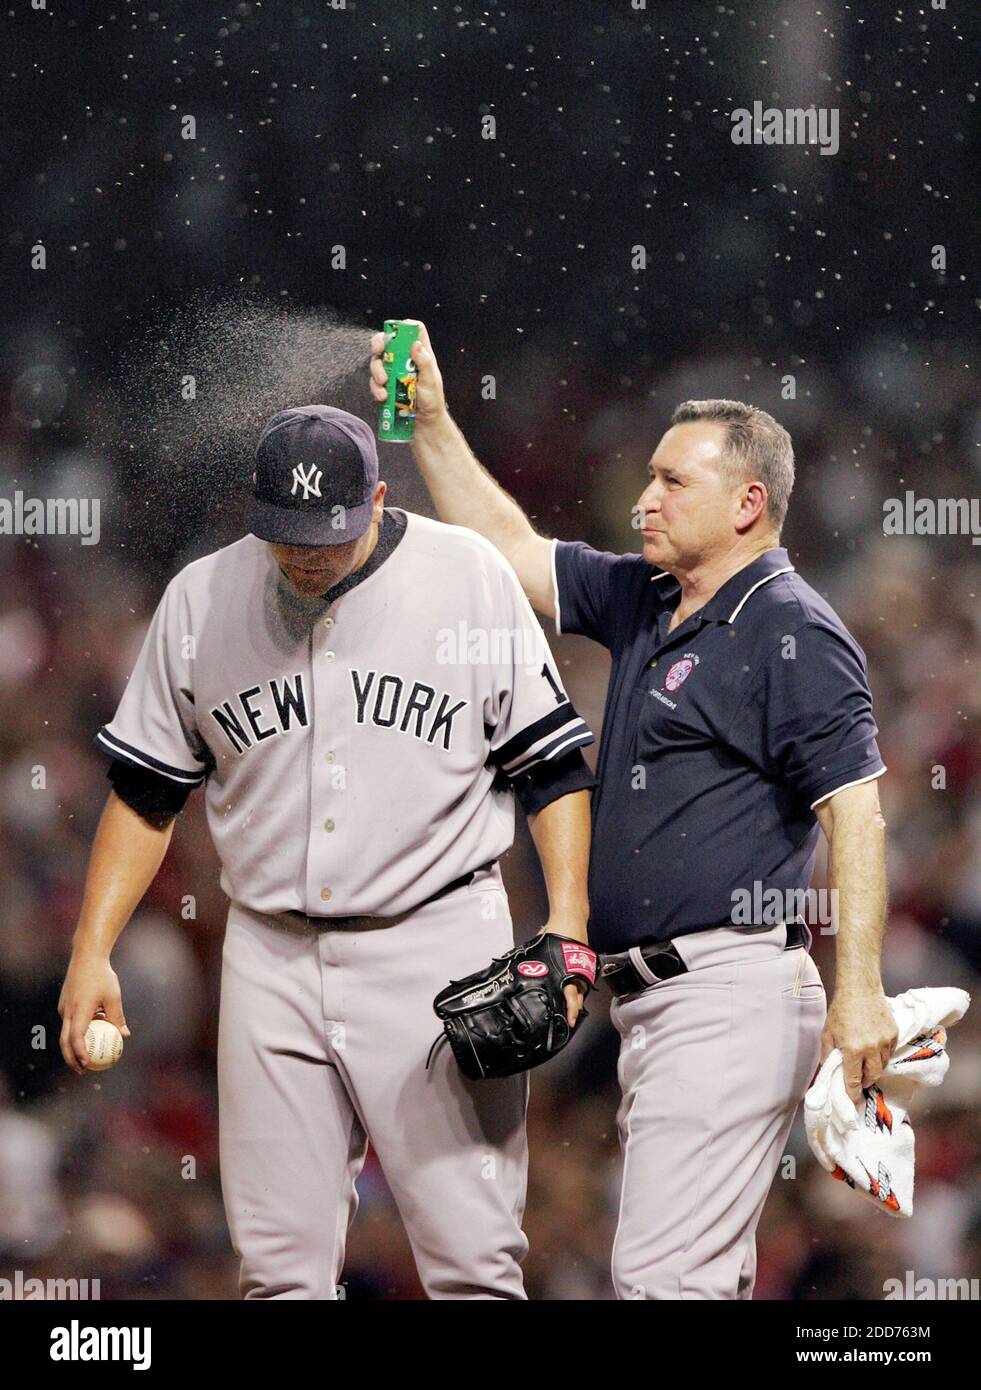 Joba Chamberlain Bug infestation helps Indians defeat Yankees. Oct 5 - This  Day In Baseball 